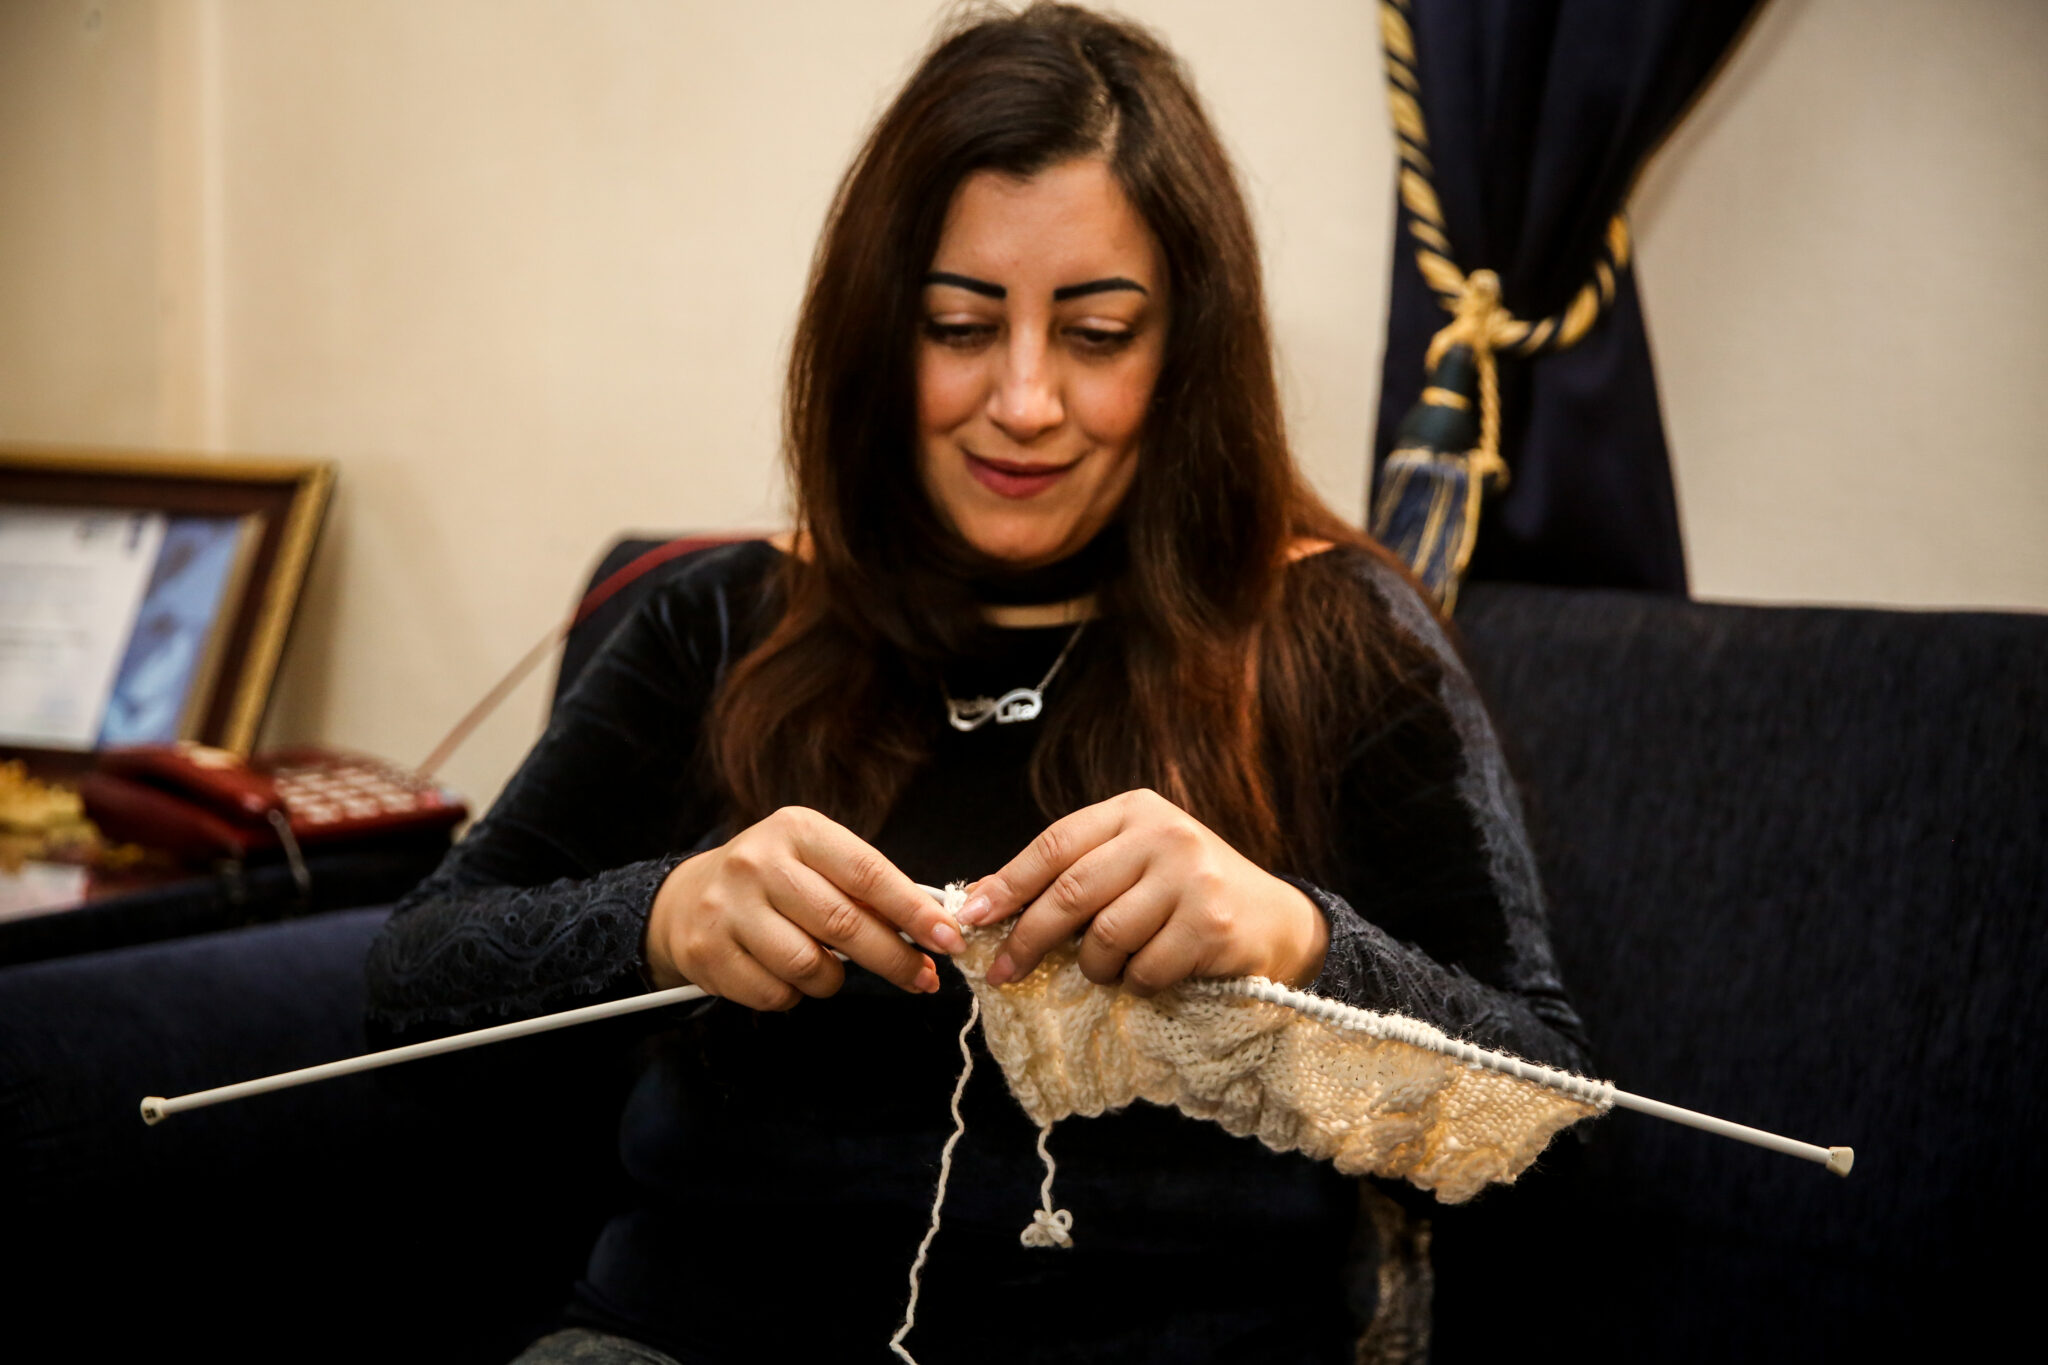 Rola is a community weaver – weaving and strengthening the fabric of civil society | AKF / Ali Shaheen